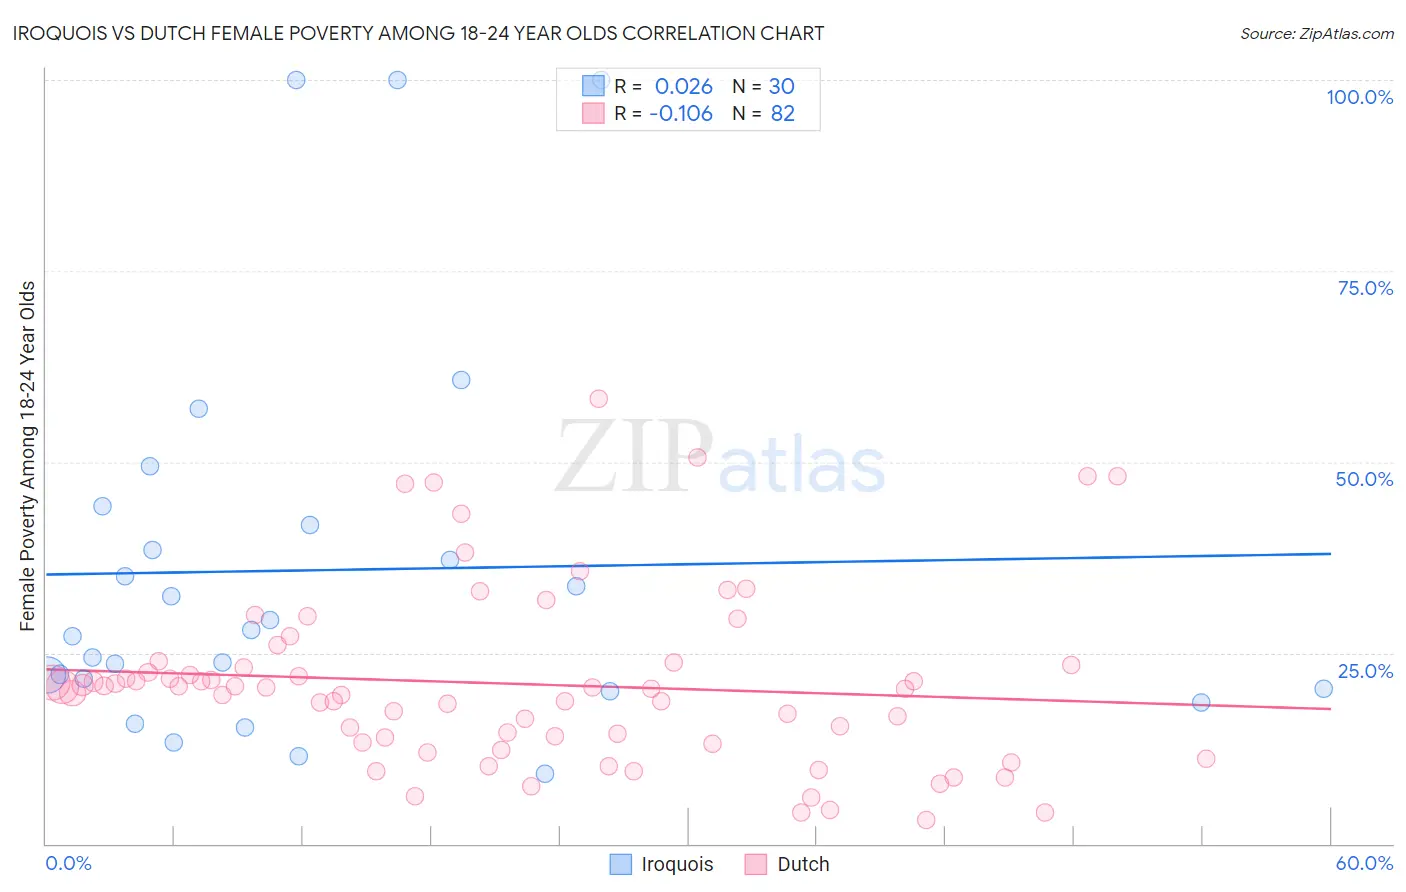 Iroquois vs Dutch Female Poverty Among 18-24 Year Olds